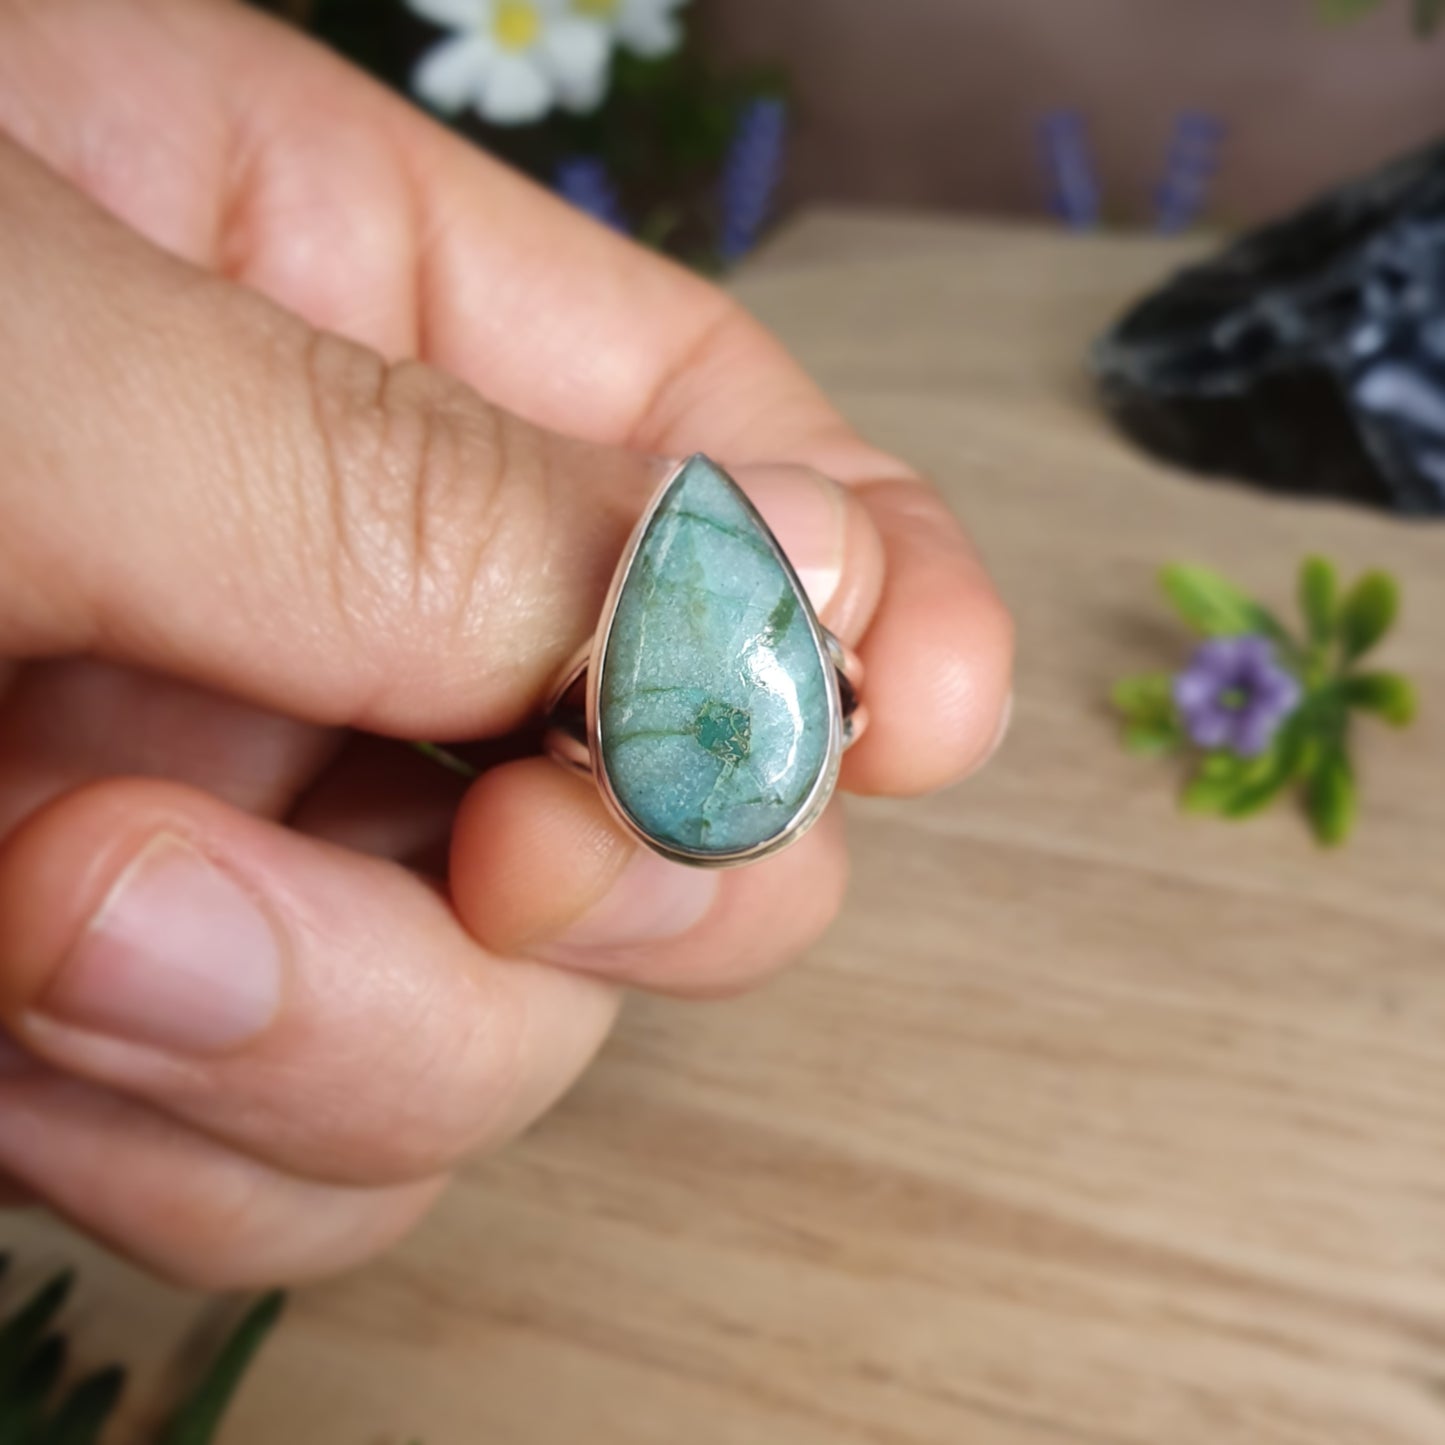 Chrysocolla Ring - Size 6.5  - ON SALE